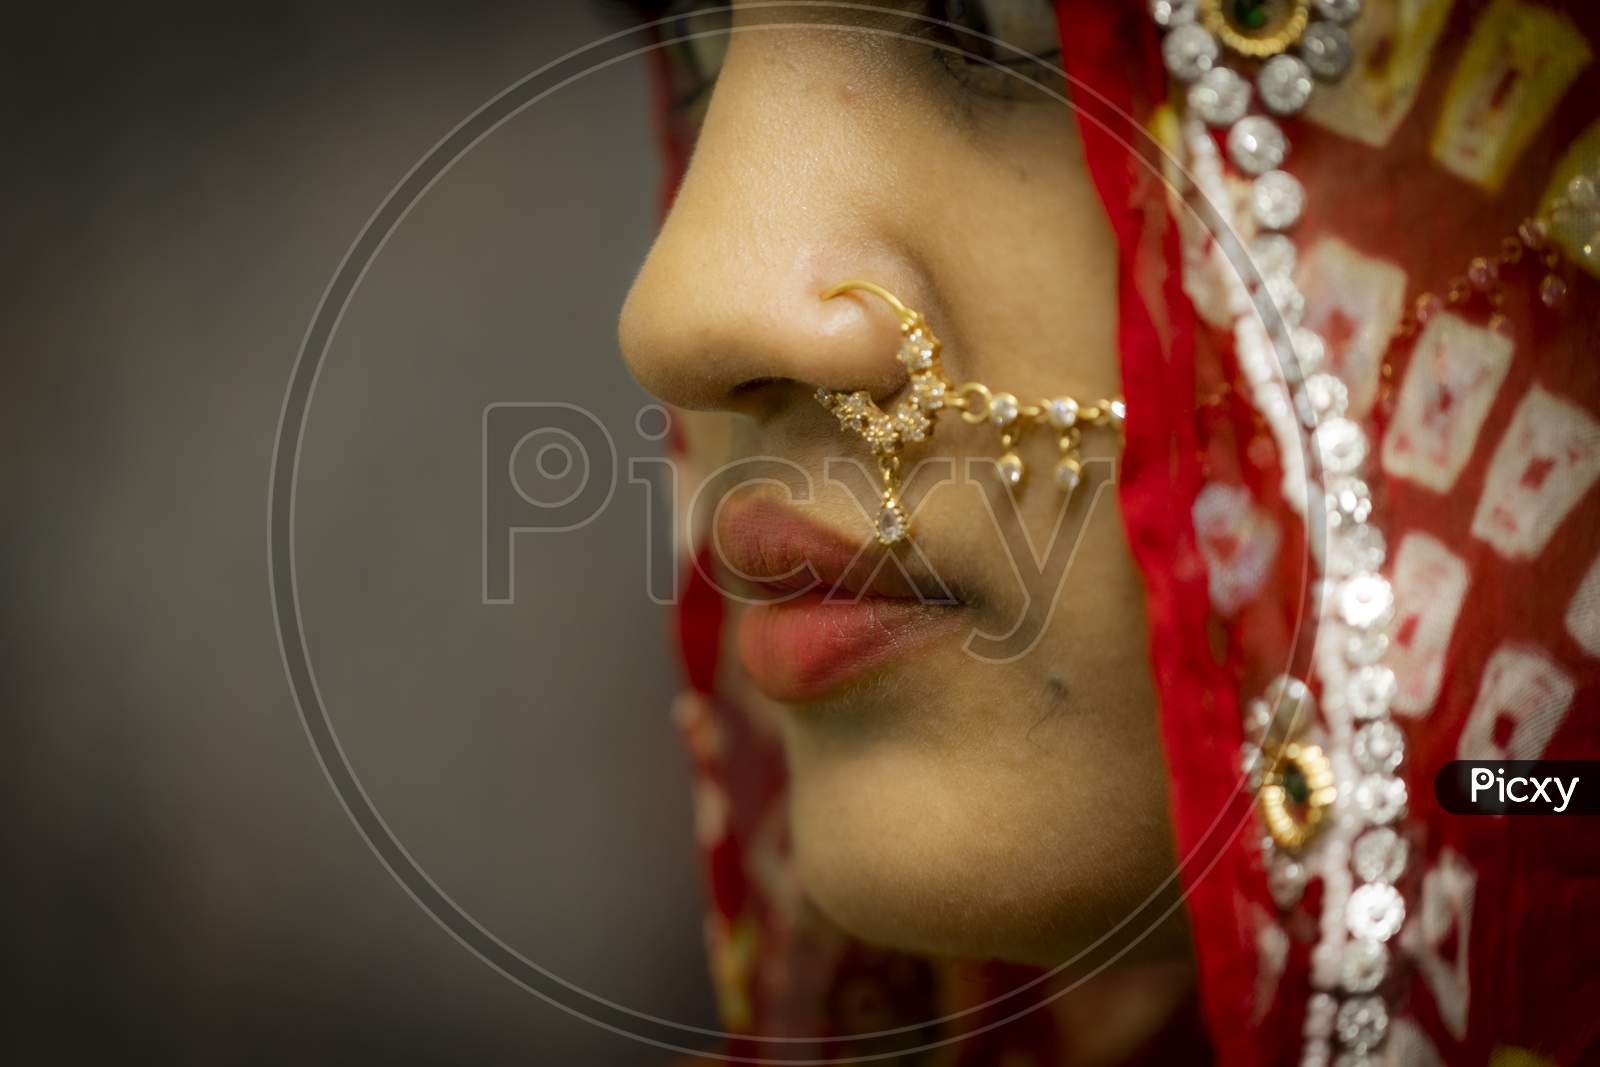 Gorgeous Woman Portrait Closeup With Wearing Shiny Gold Nose Rings